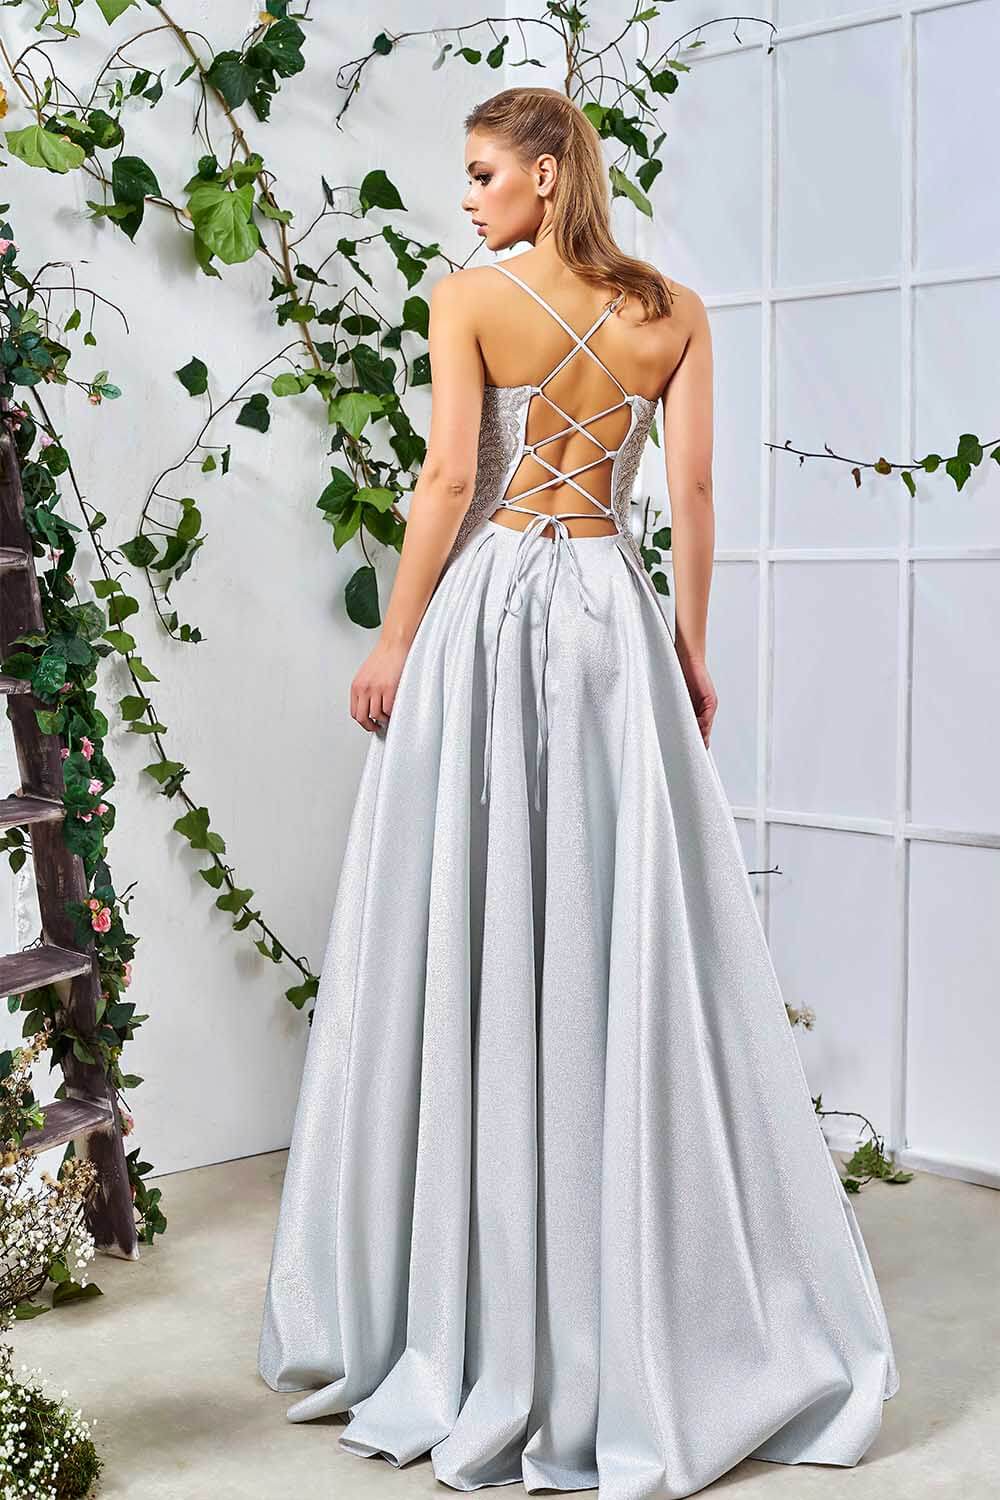 Long Gray Evening Dress with Stones and Thin Straps